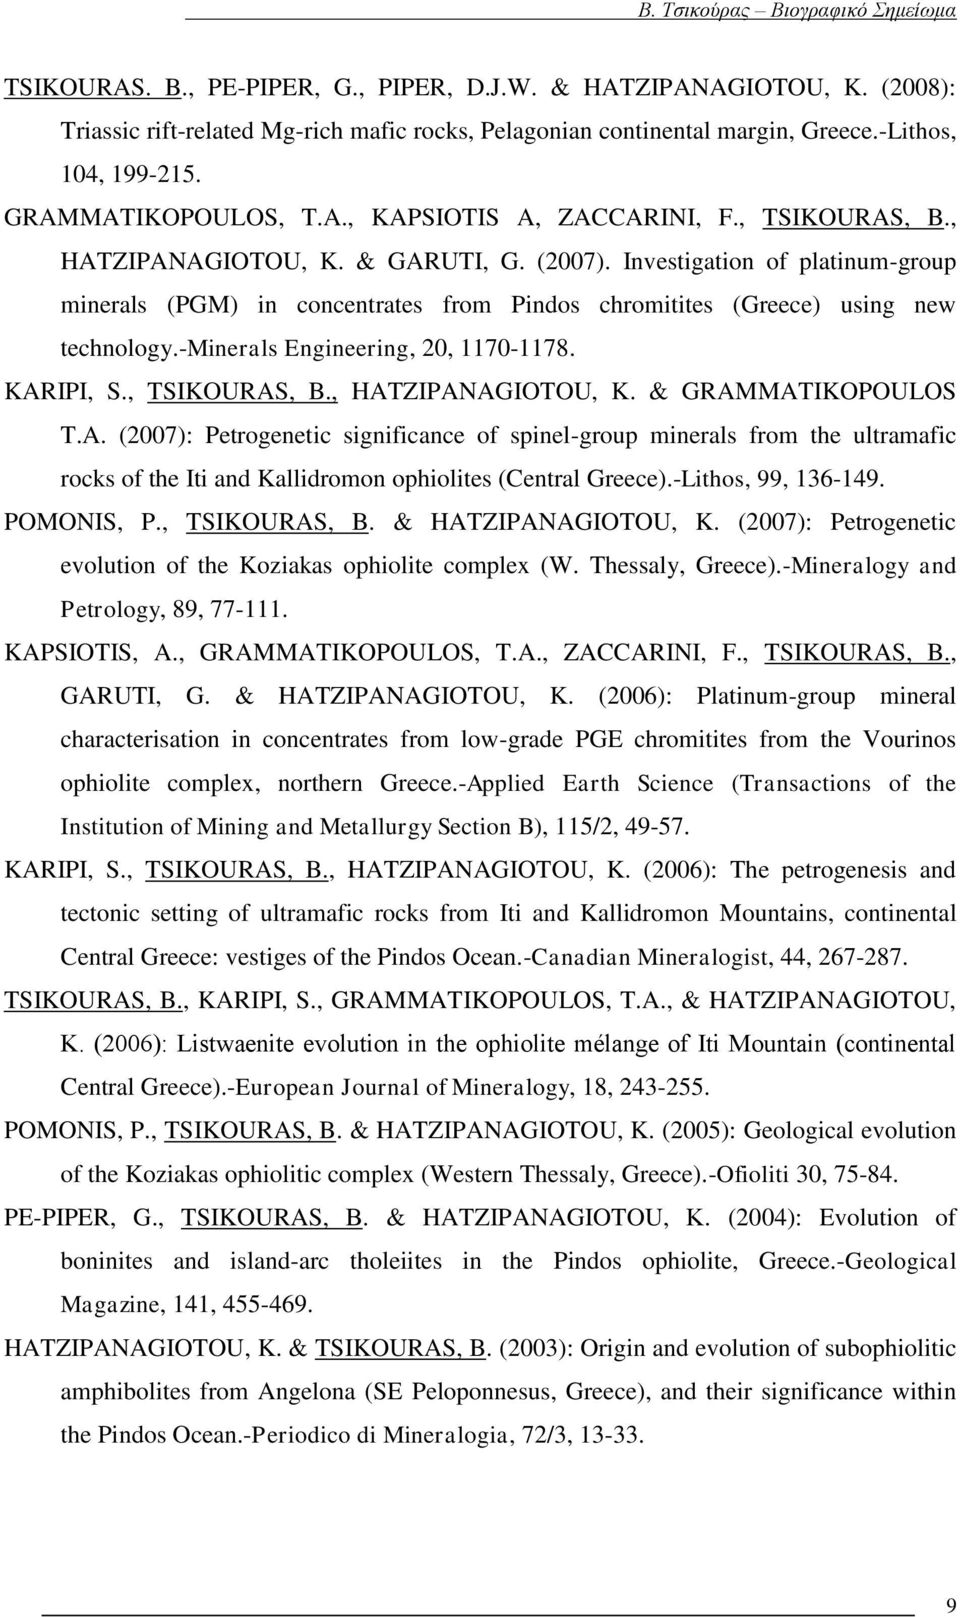 -minerals Engineering, 20, 1170-1178. KARIPI, S., TSIKOURAS, B., HATZIPANAGIOTOU, K. & GRAMMATIKOPOULOS T.A. (2007): Petrogenetic significance of spinel-group minerals from the ultramafic rocks of the Iti and Kallidromon ophiolites (Central Greece).